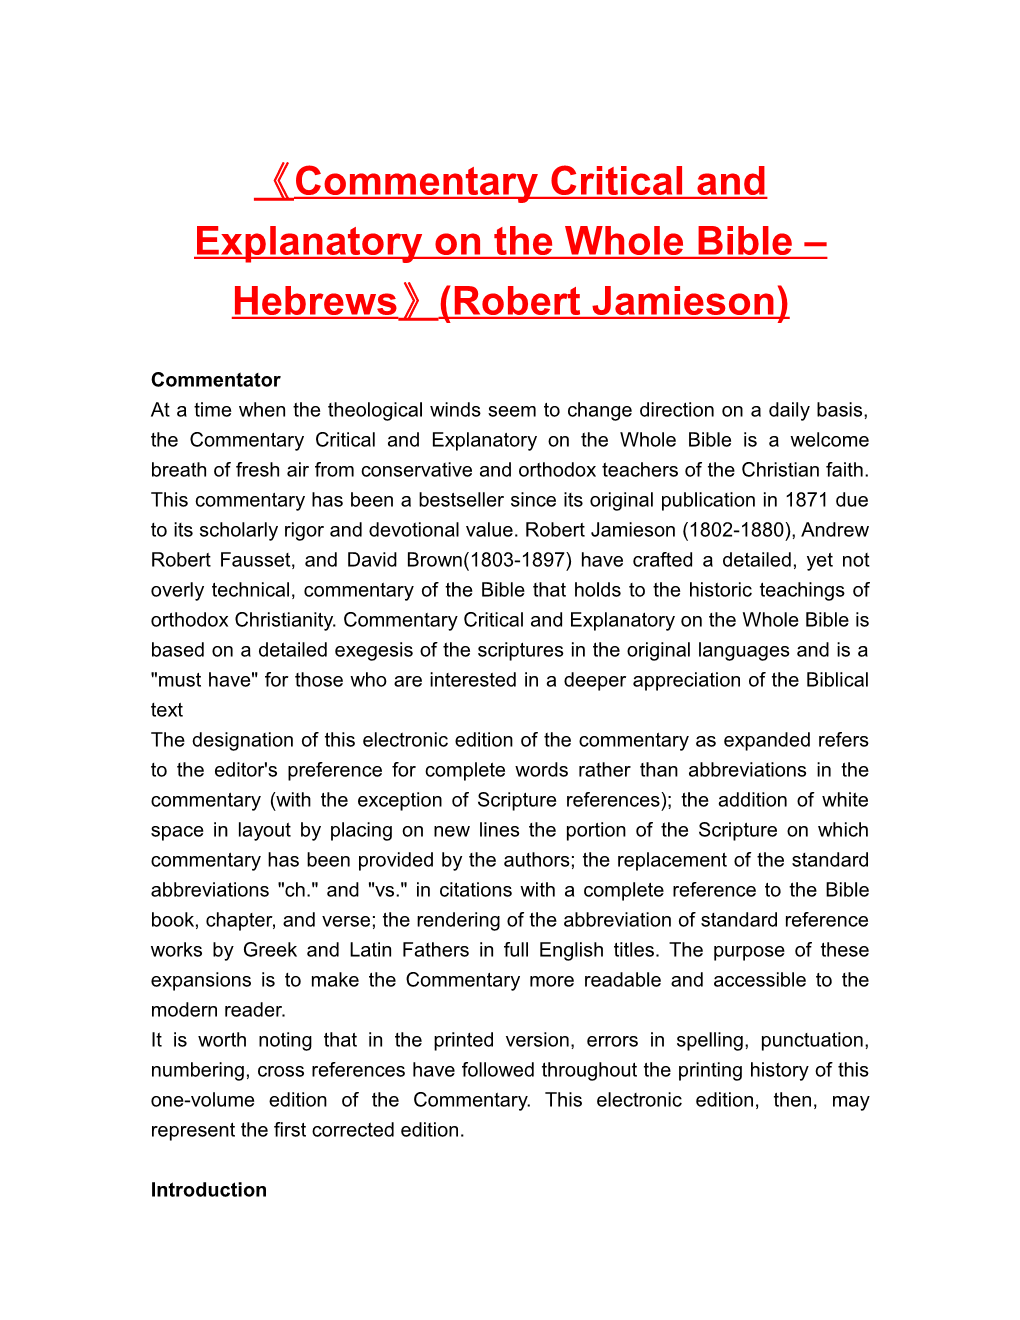 Commentary Critical and Explanatory on the Whole Bible Hebrews (Robert Jamieson)